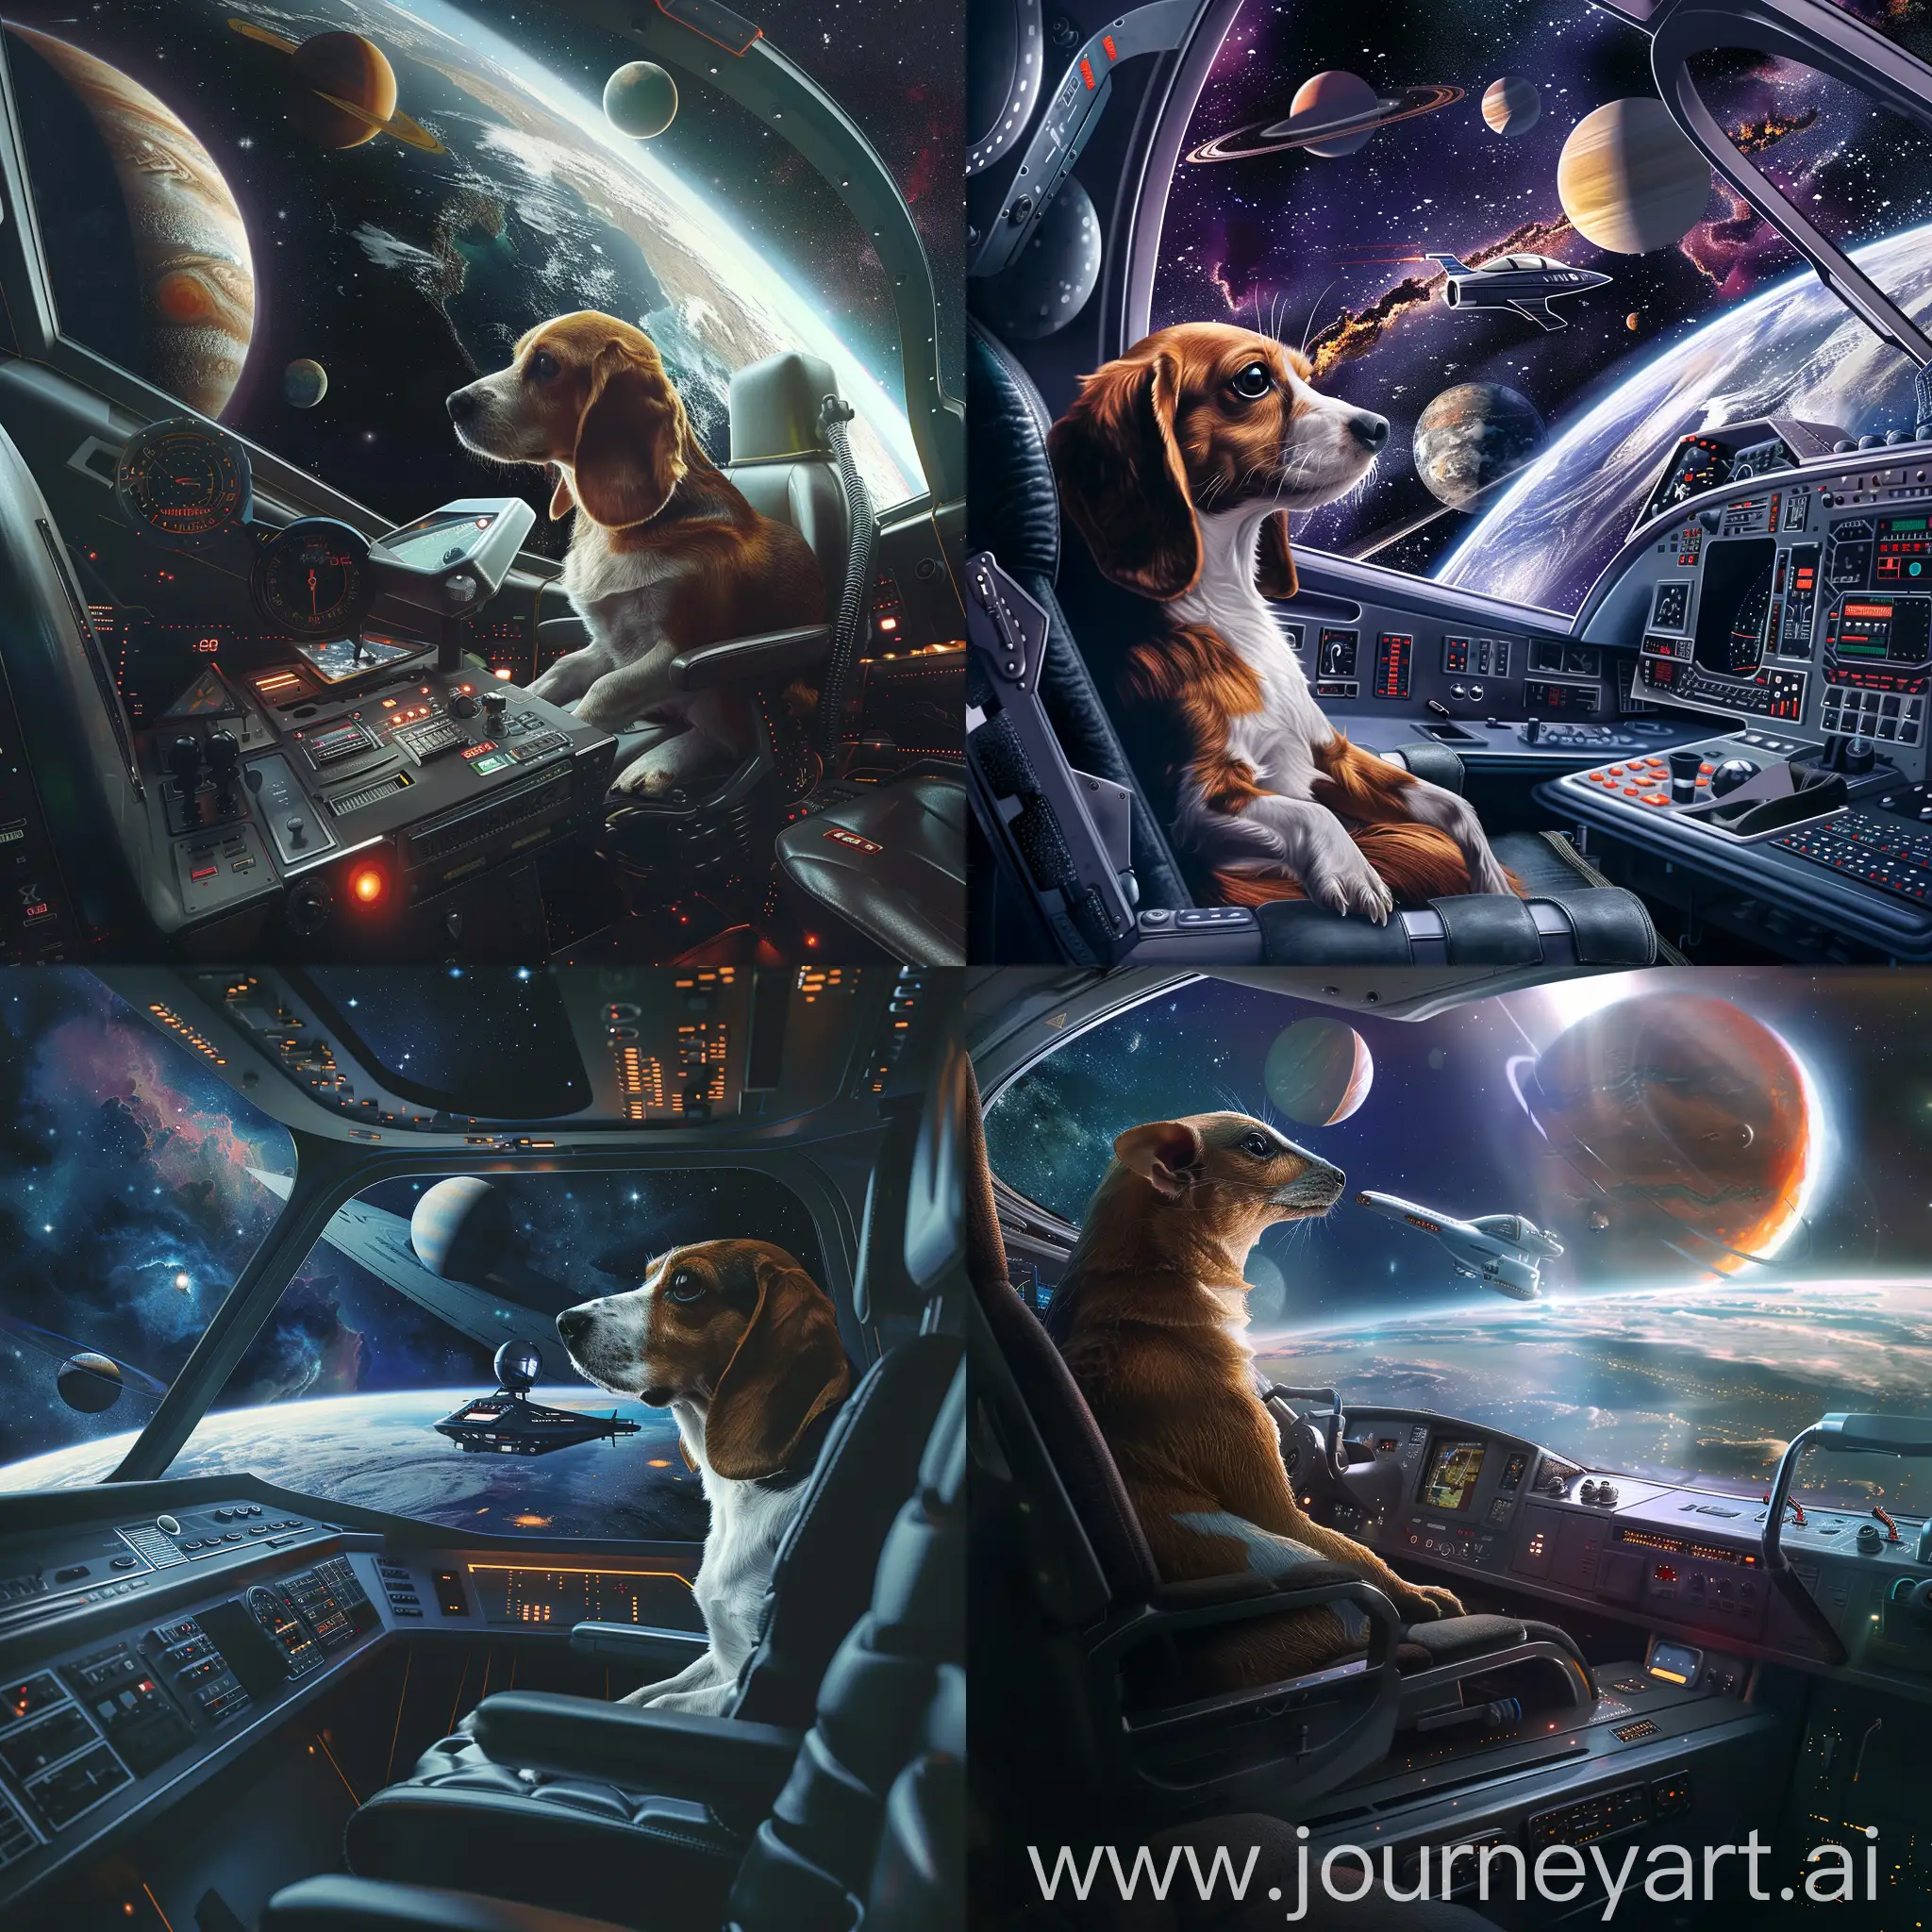 Create an ultra-realistic image of a Beagle sitting in a UFO cockpit, with planets and space visible in the background, capturing the essence of a sci-fi adventure.